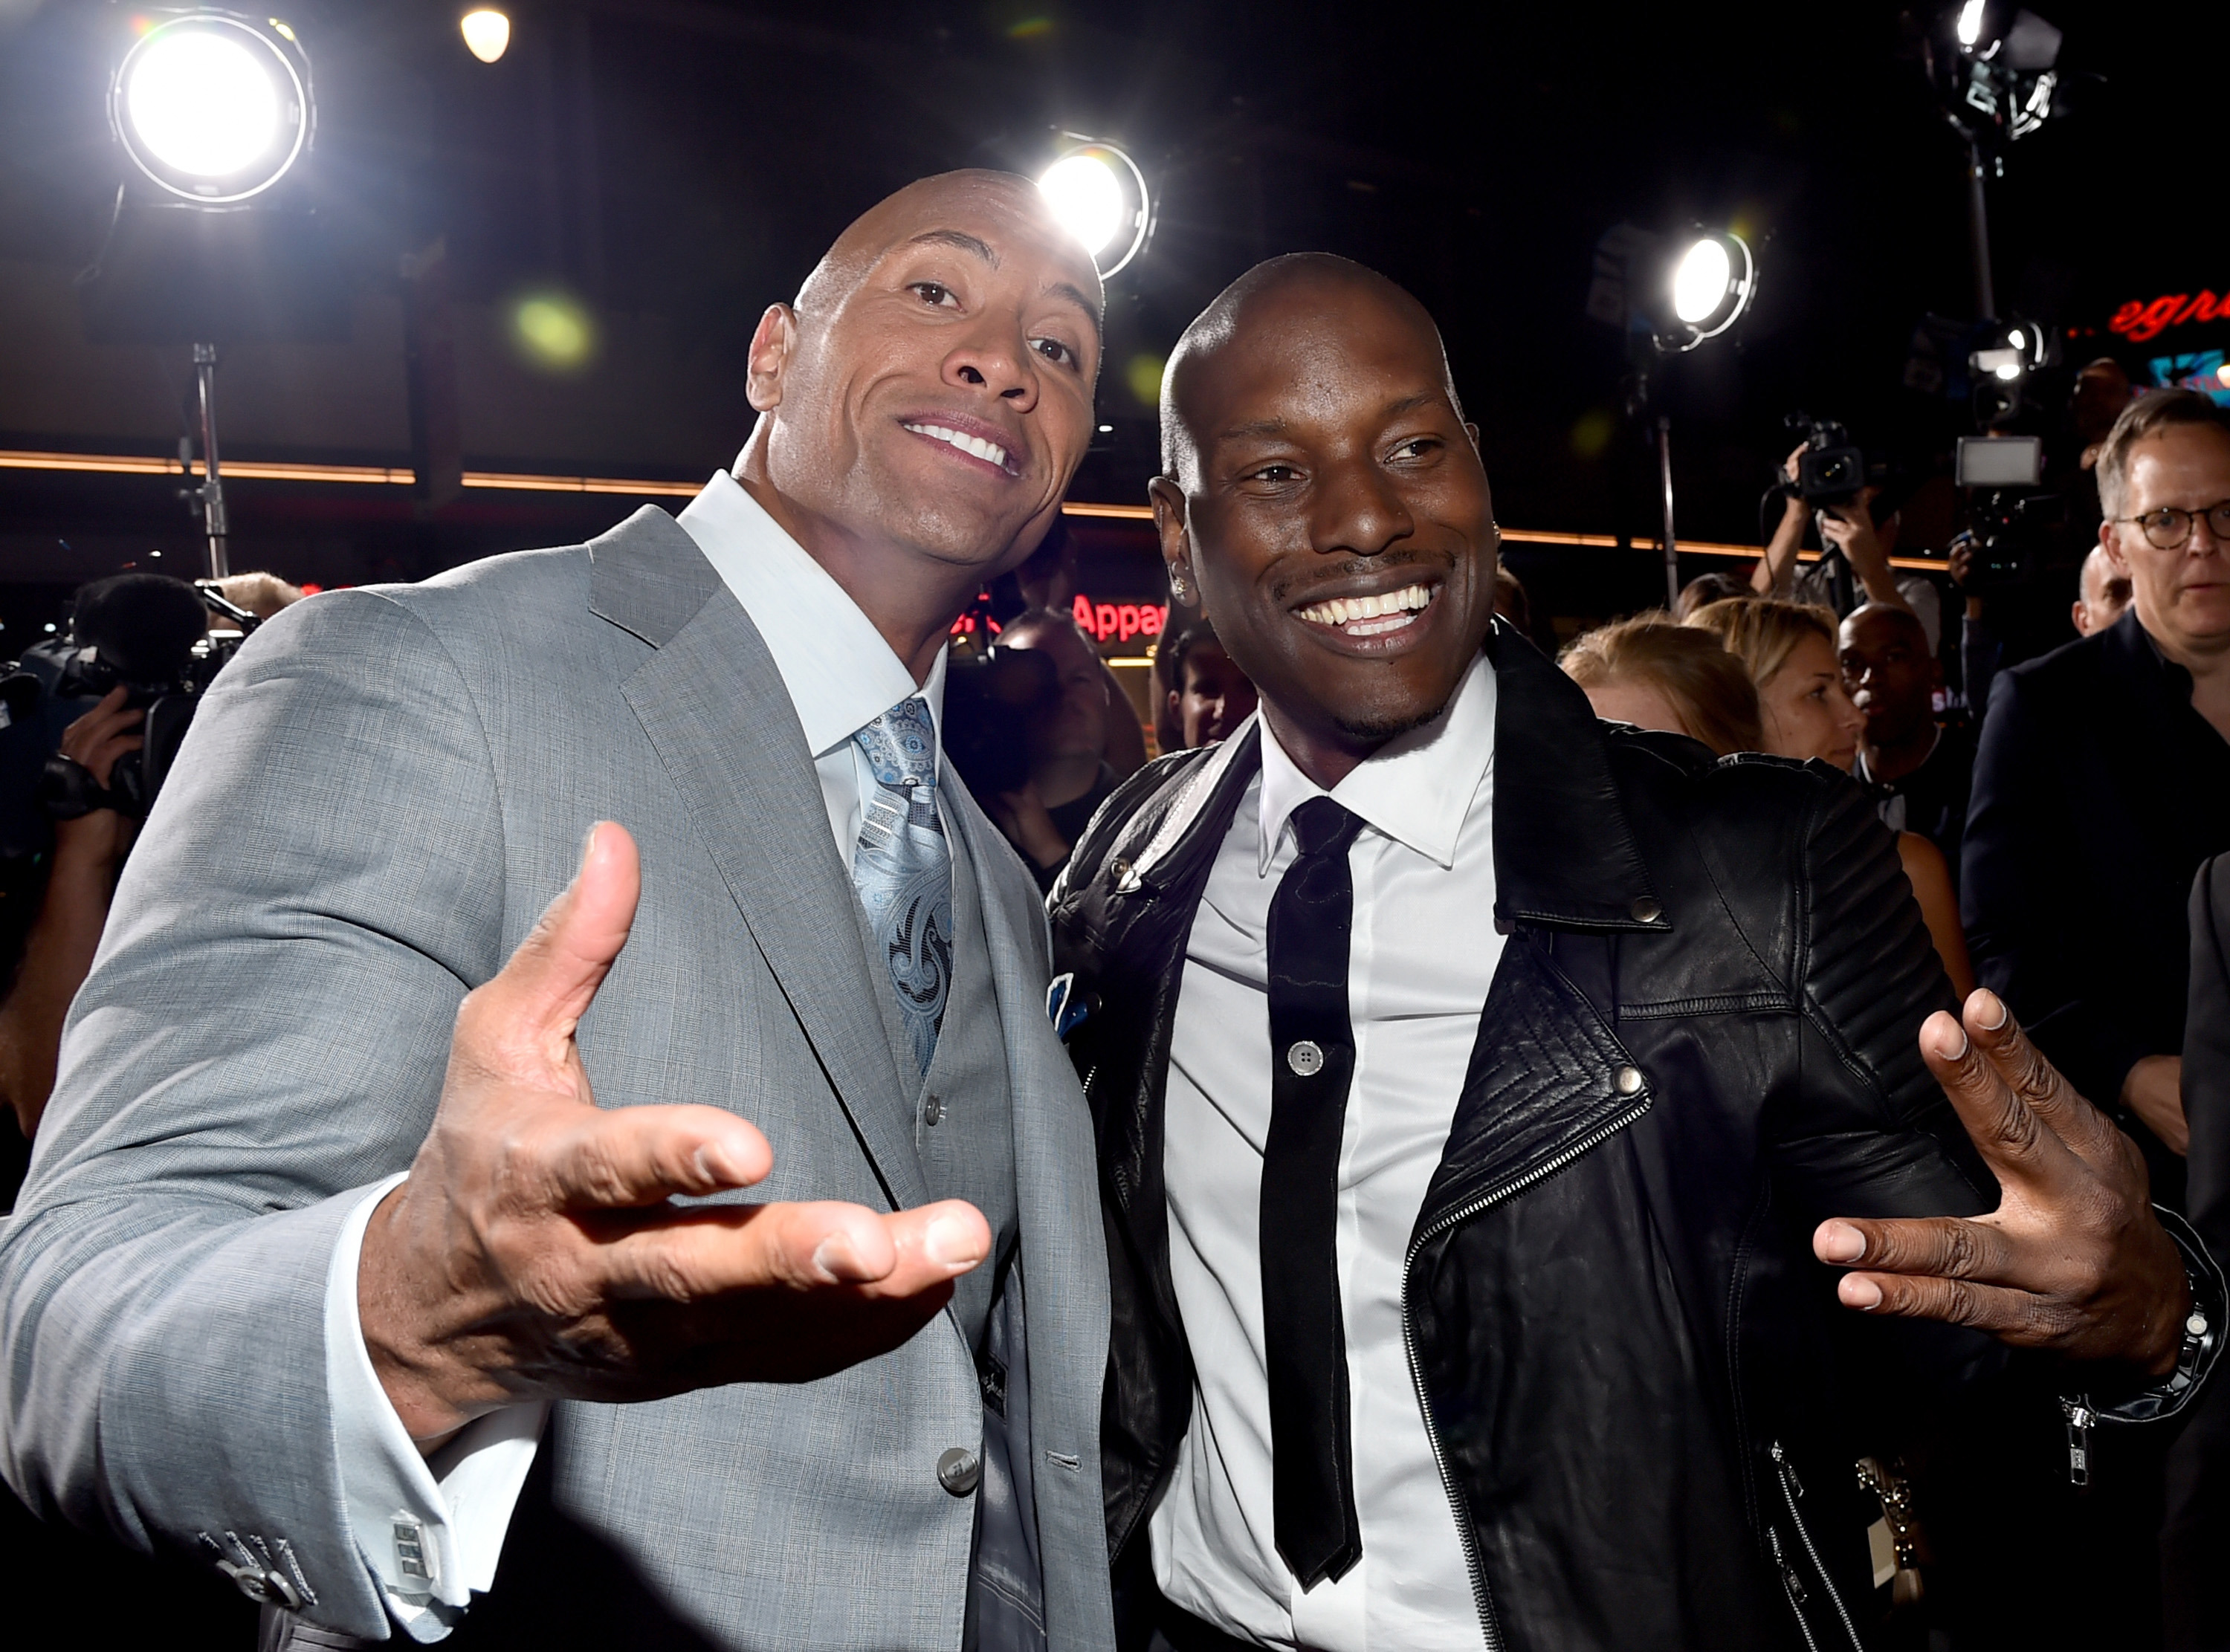 Tyrese Gibson and Dwayne 'The Rock' Johnson